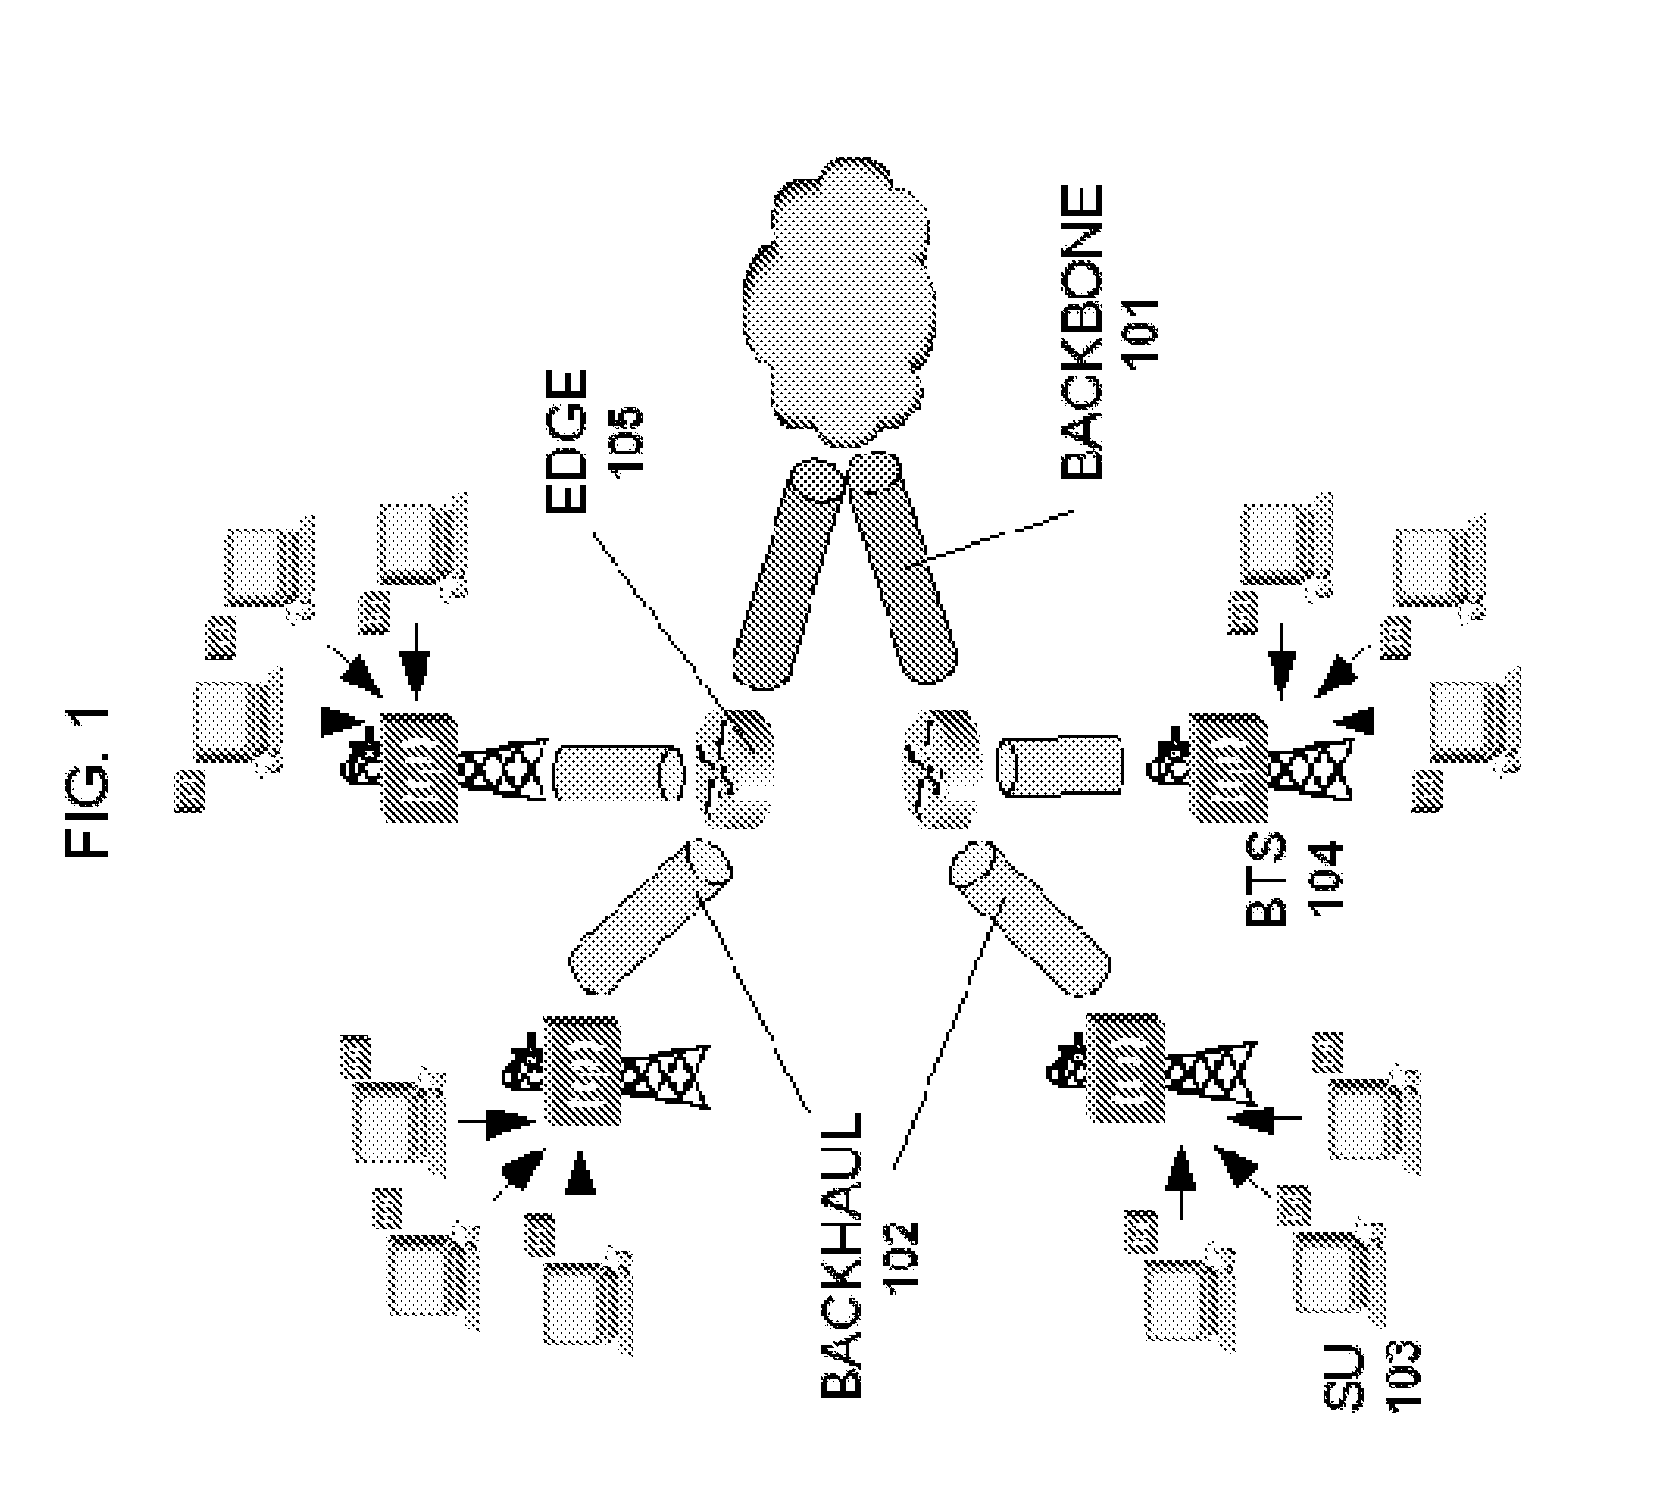 Methods And Systems For Providing Quality Of Service In Packet-Based Core Transport Networks